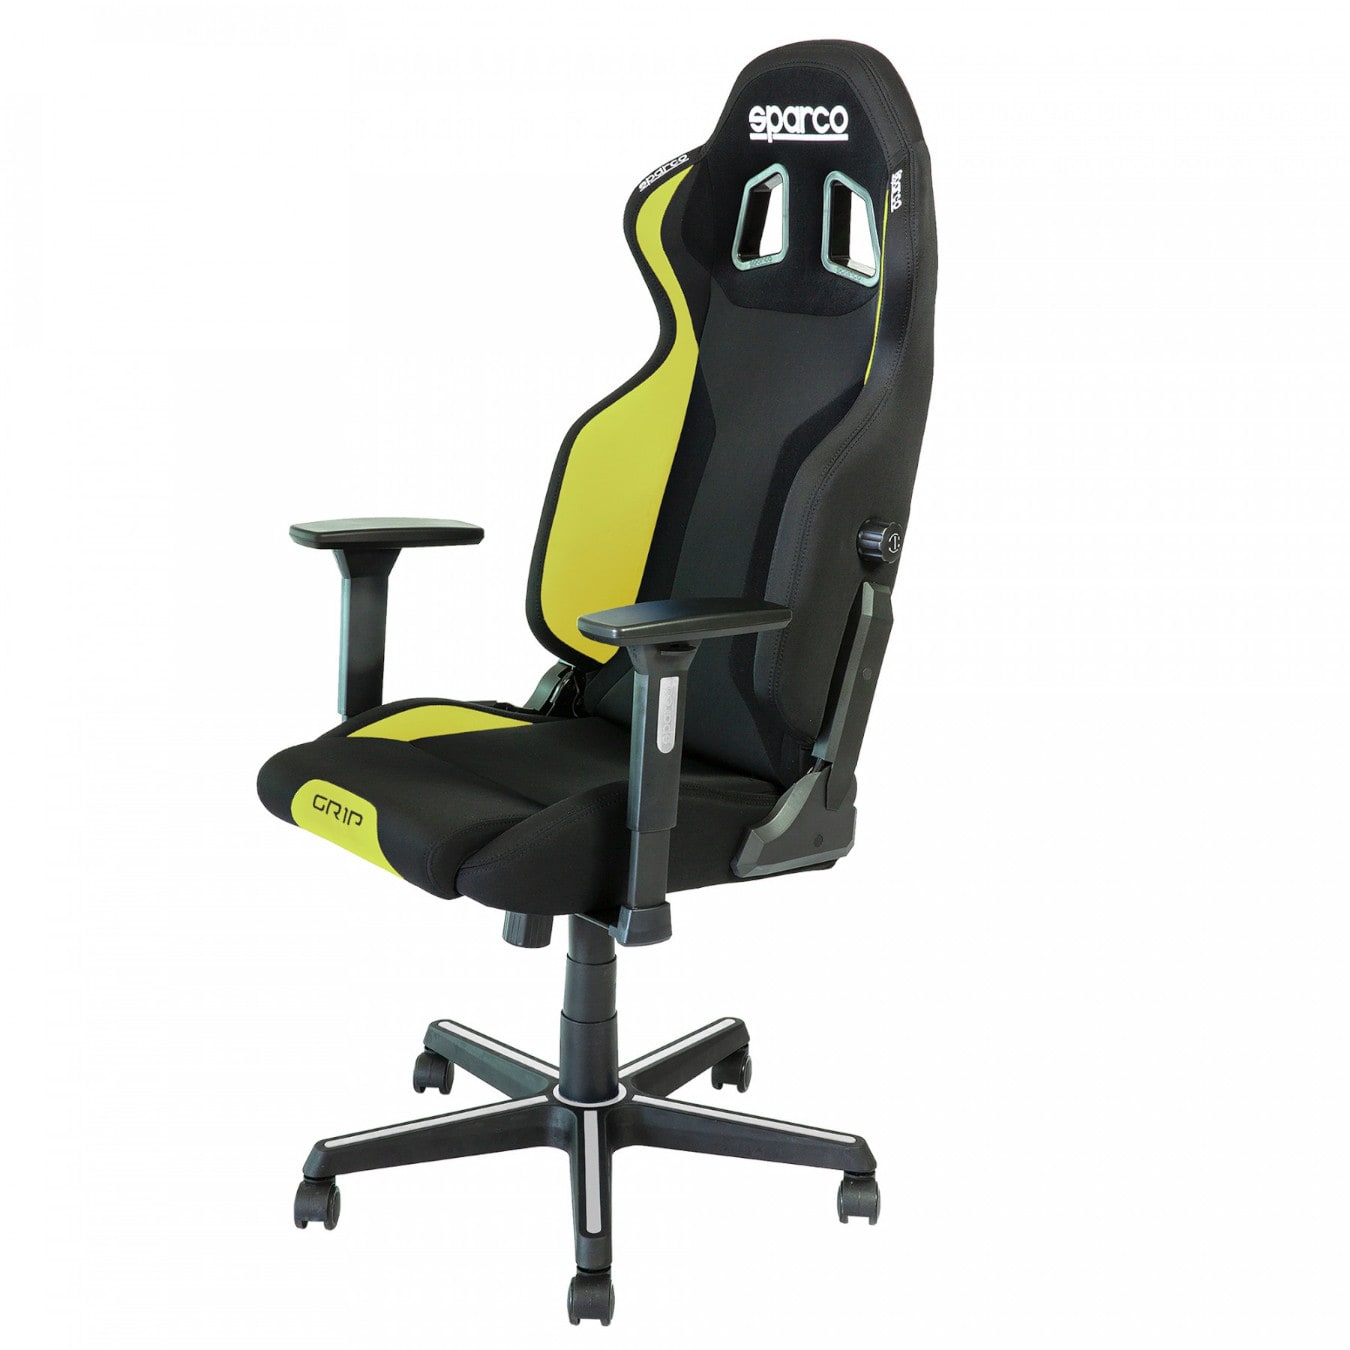 Sparco Grip Office Chair On Oreca Store